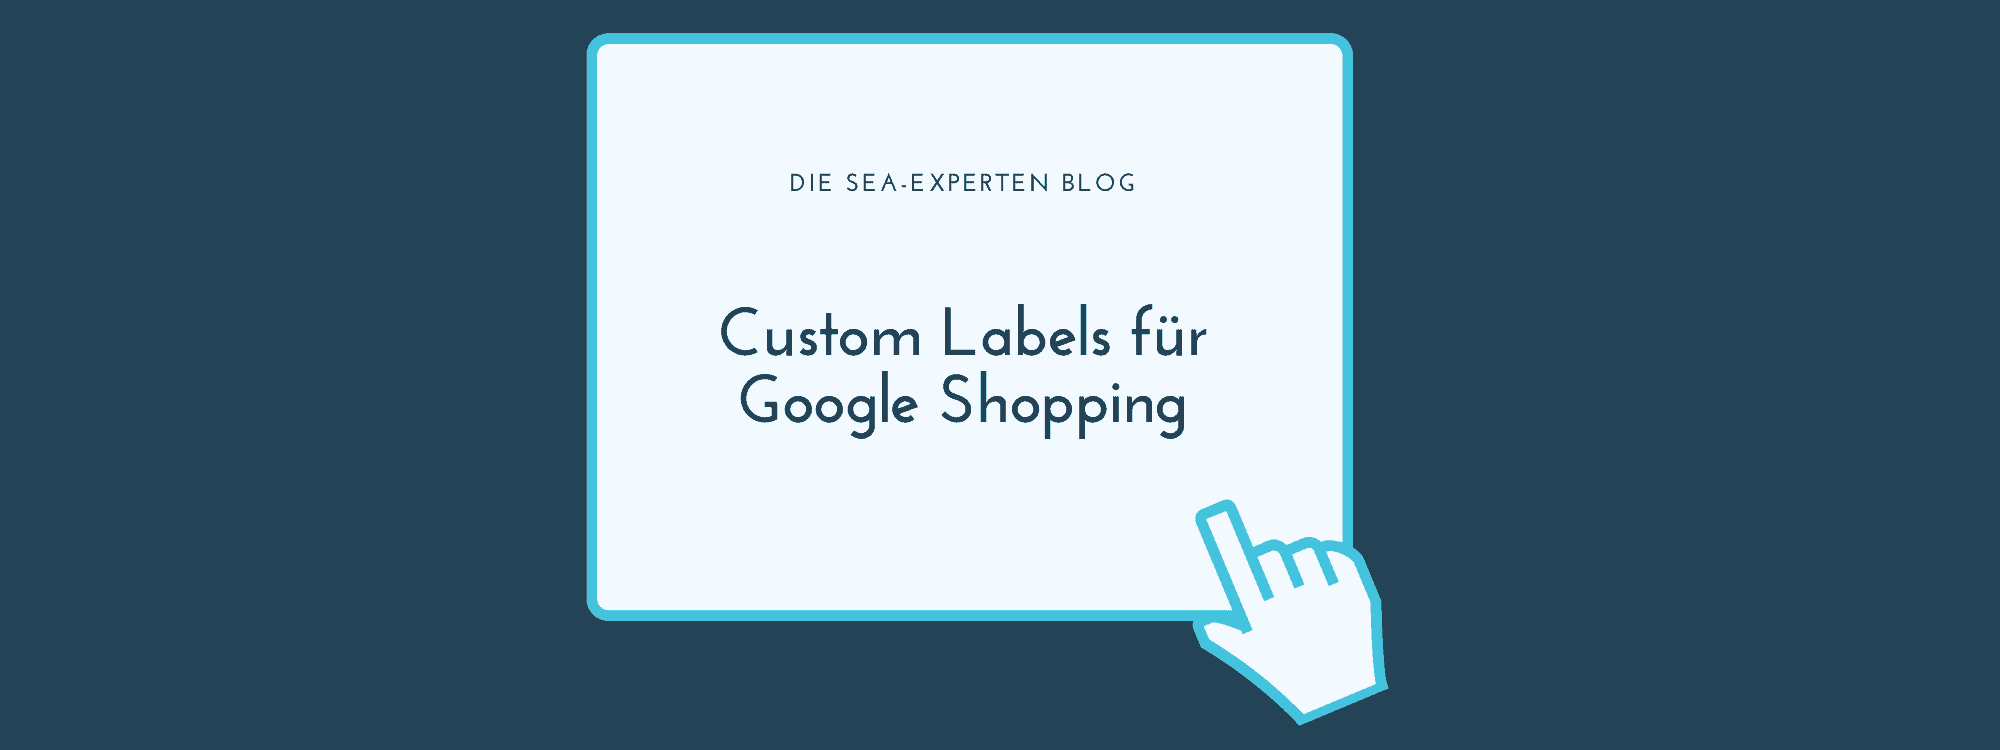 Featured image for “Custom Labels für Google Shopping”